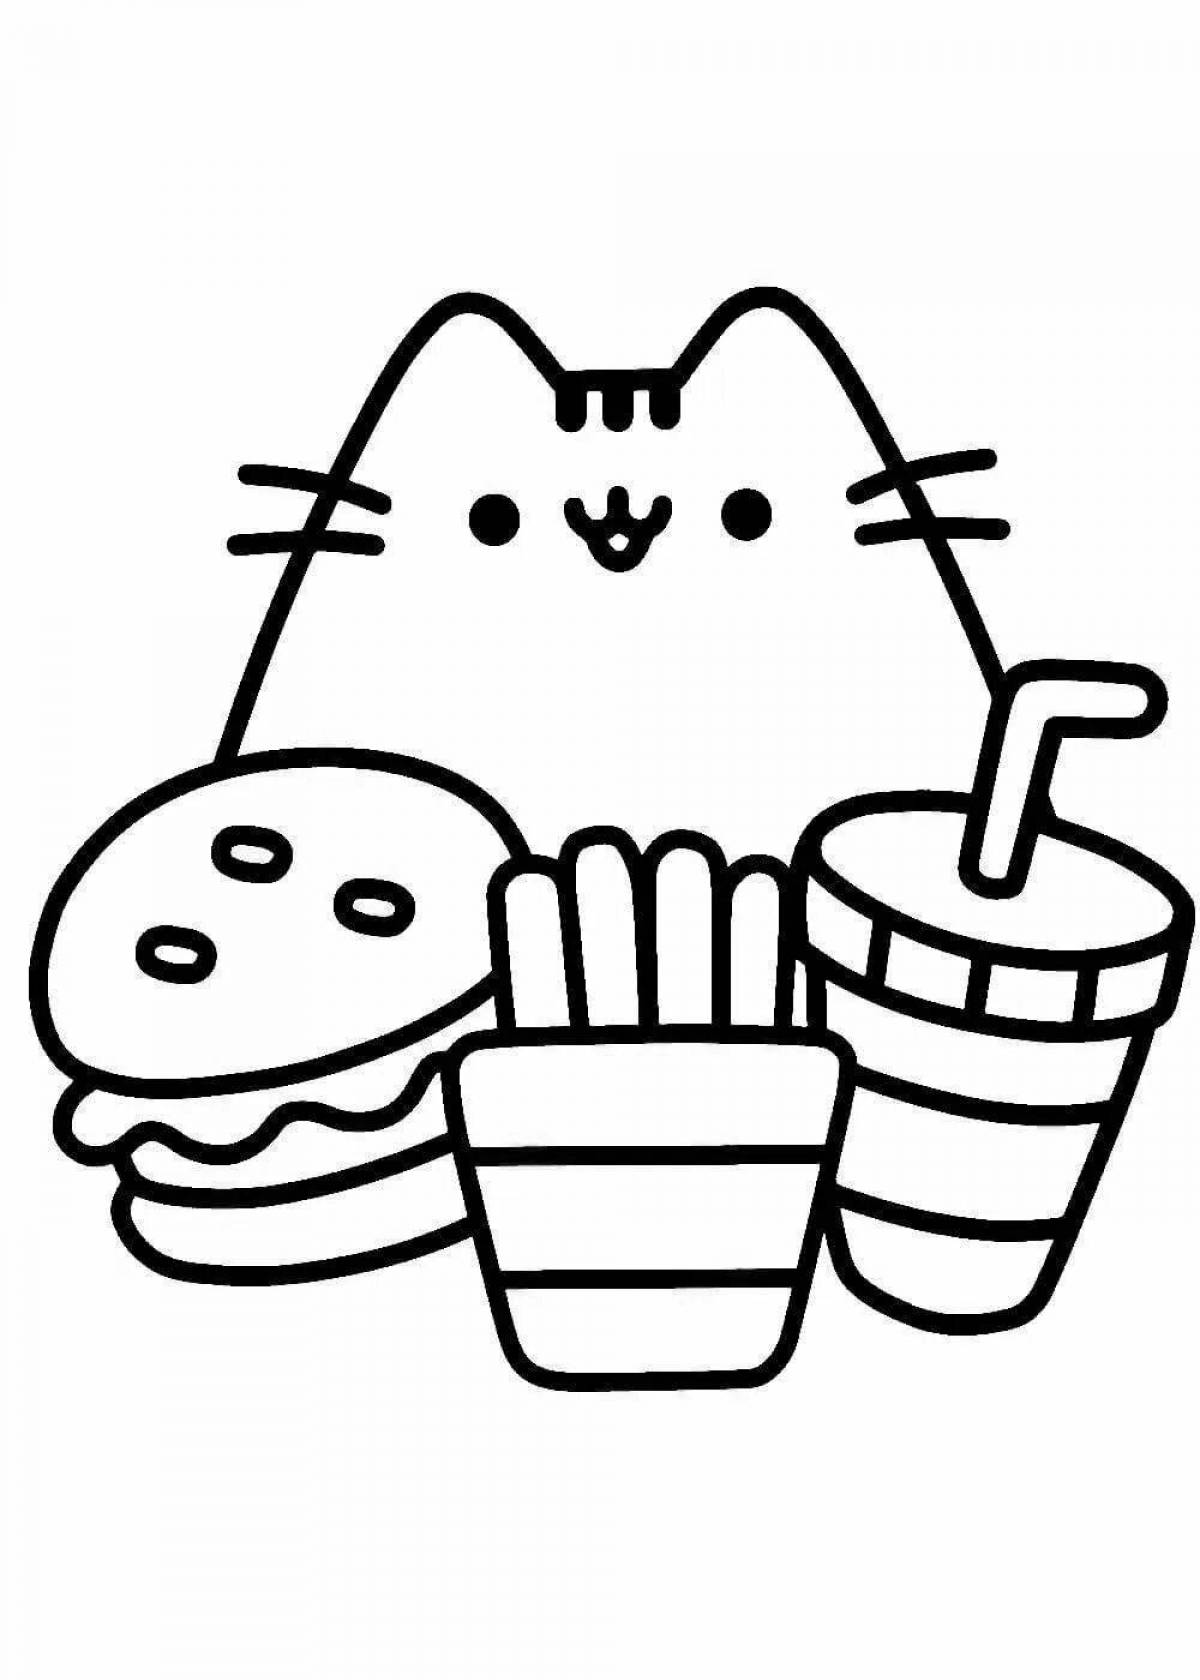 Great pusheen cat coloring page